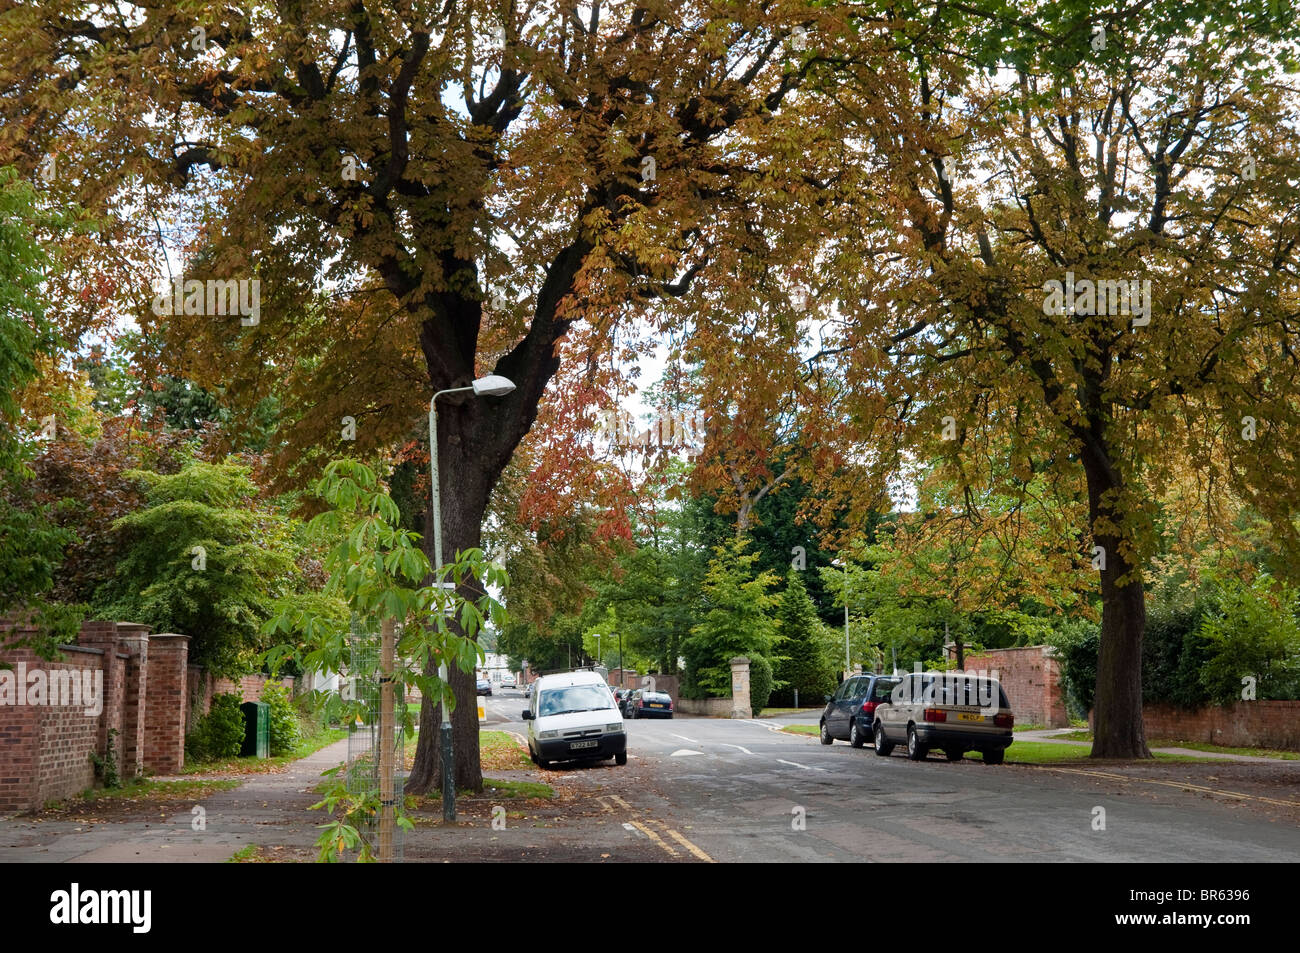 Horsechestnut trees in a town / suburban setting, unfortunately suffering from the leaf miner infestation 'Cameraria ohridella' Stock Photo